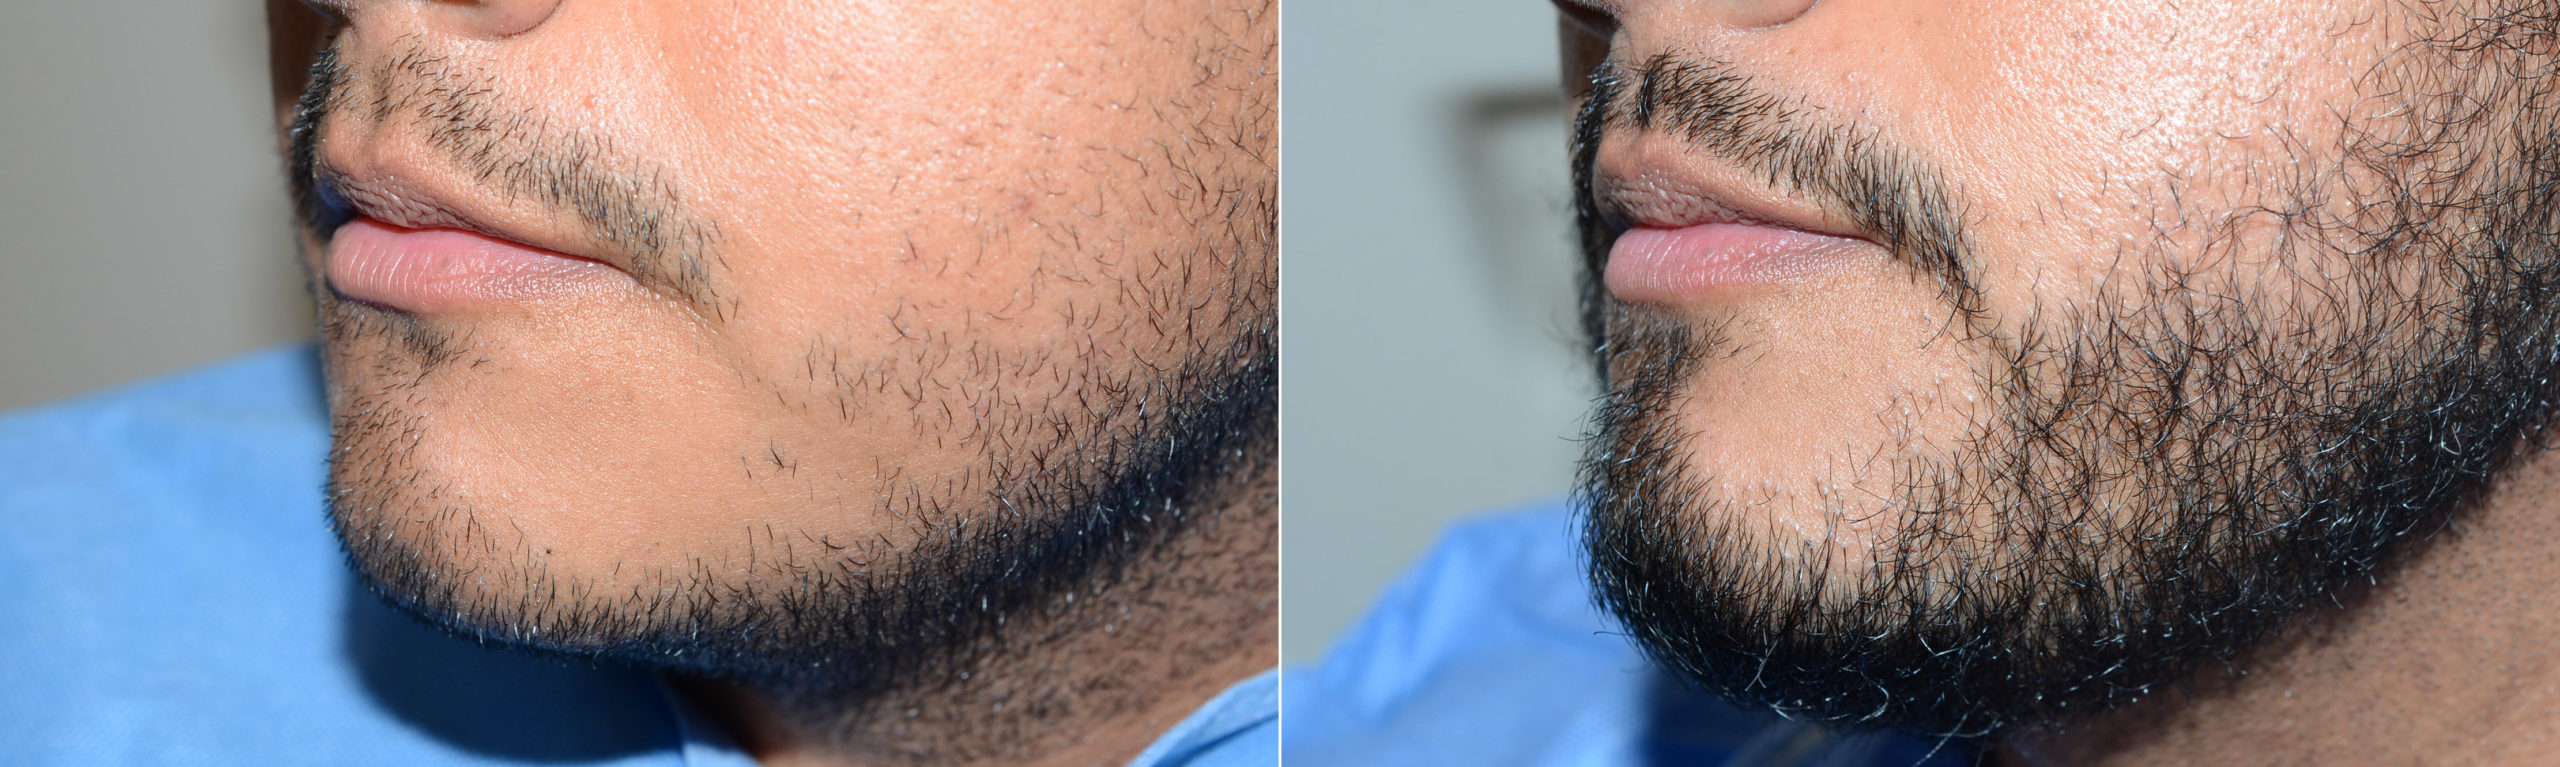 Facial Hair Transplant Before and After Photos - Foundation For Hair  Restoration